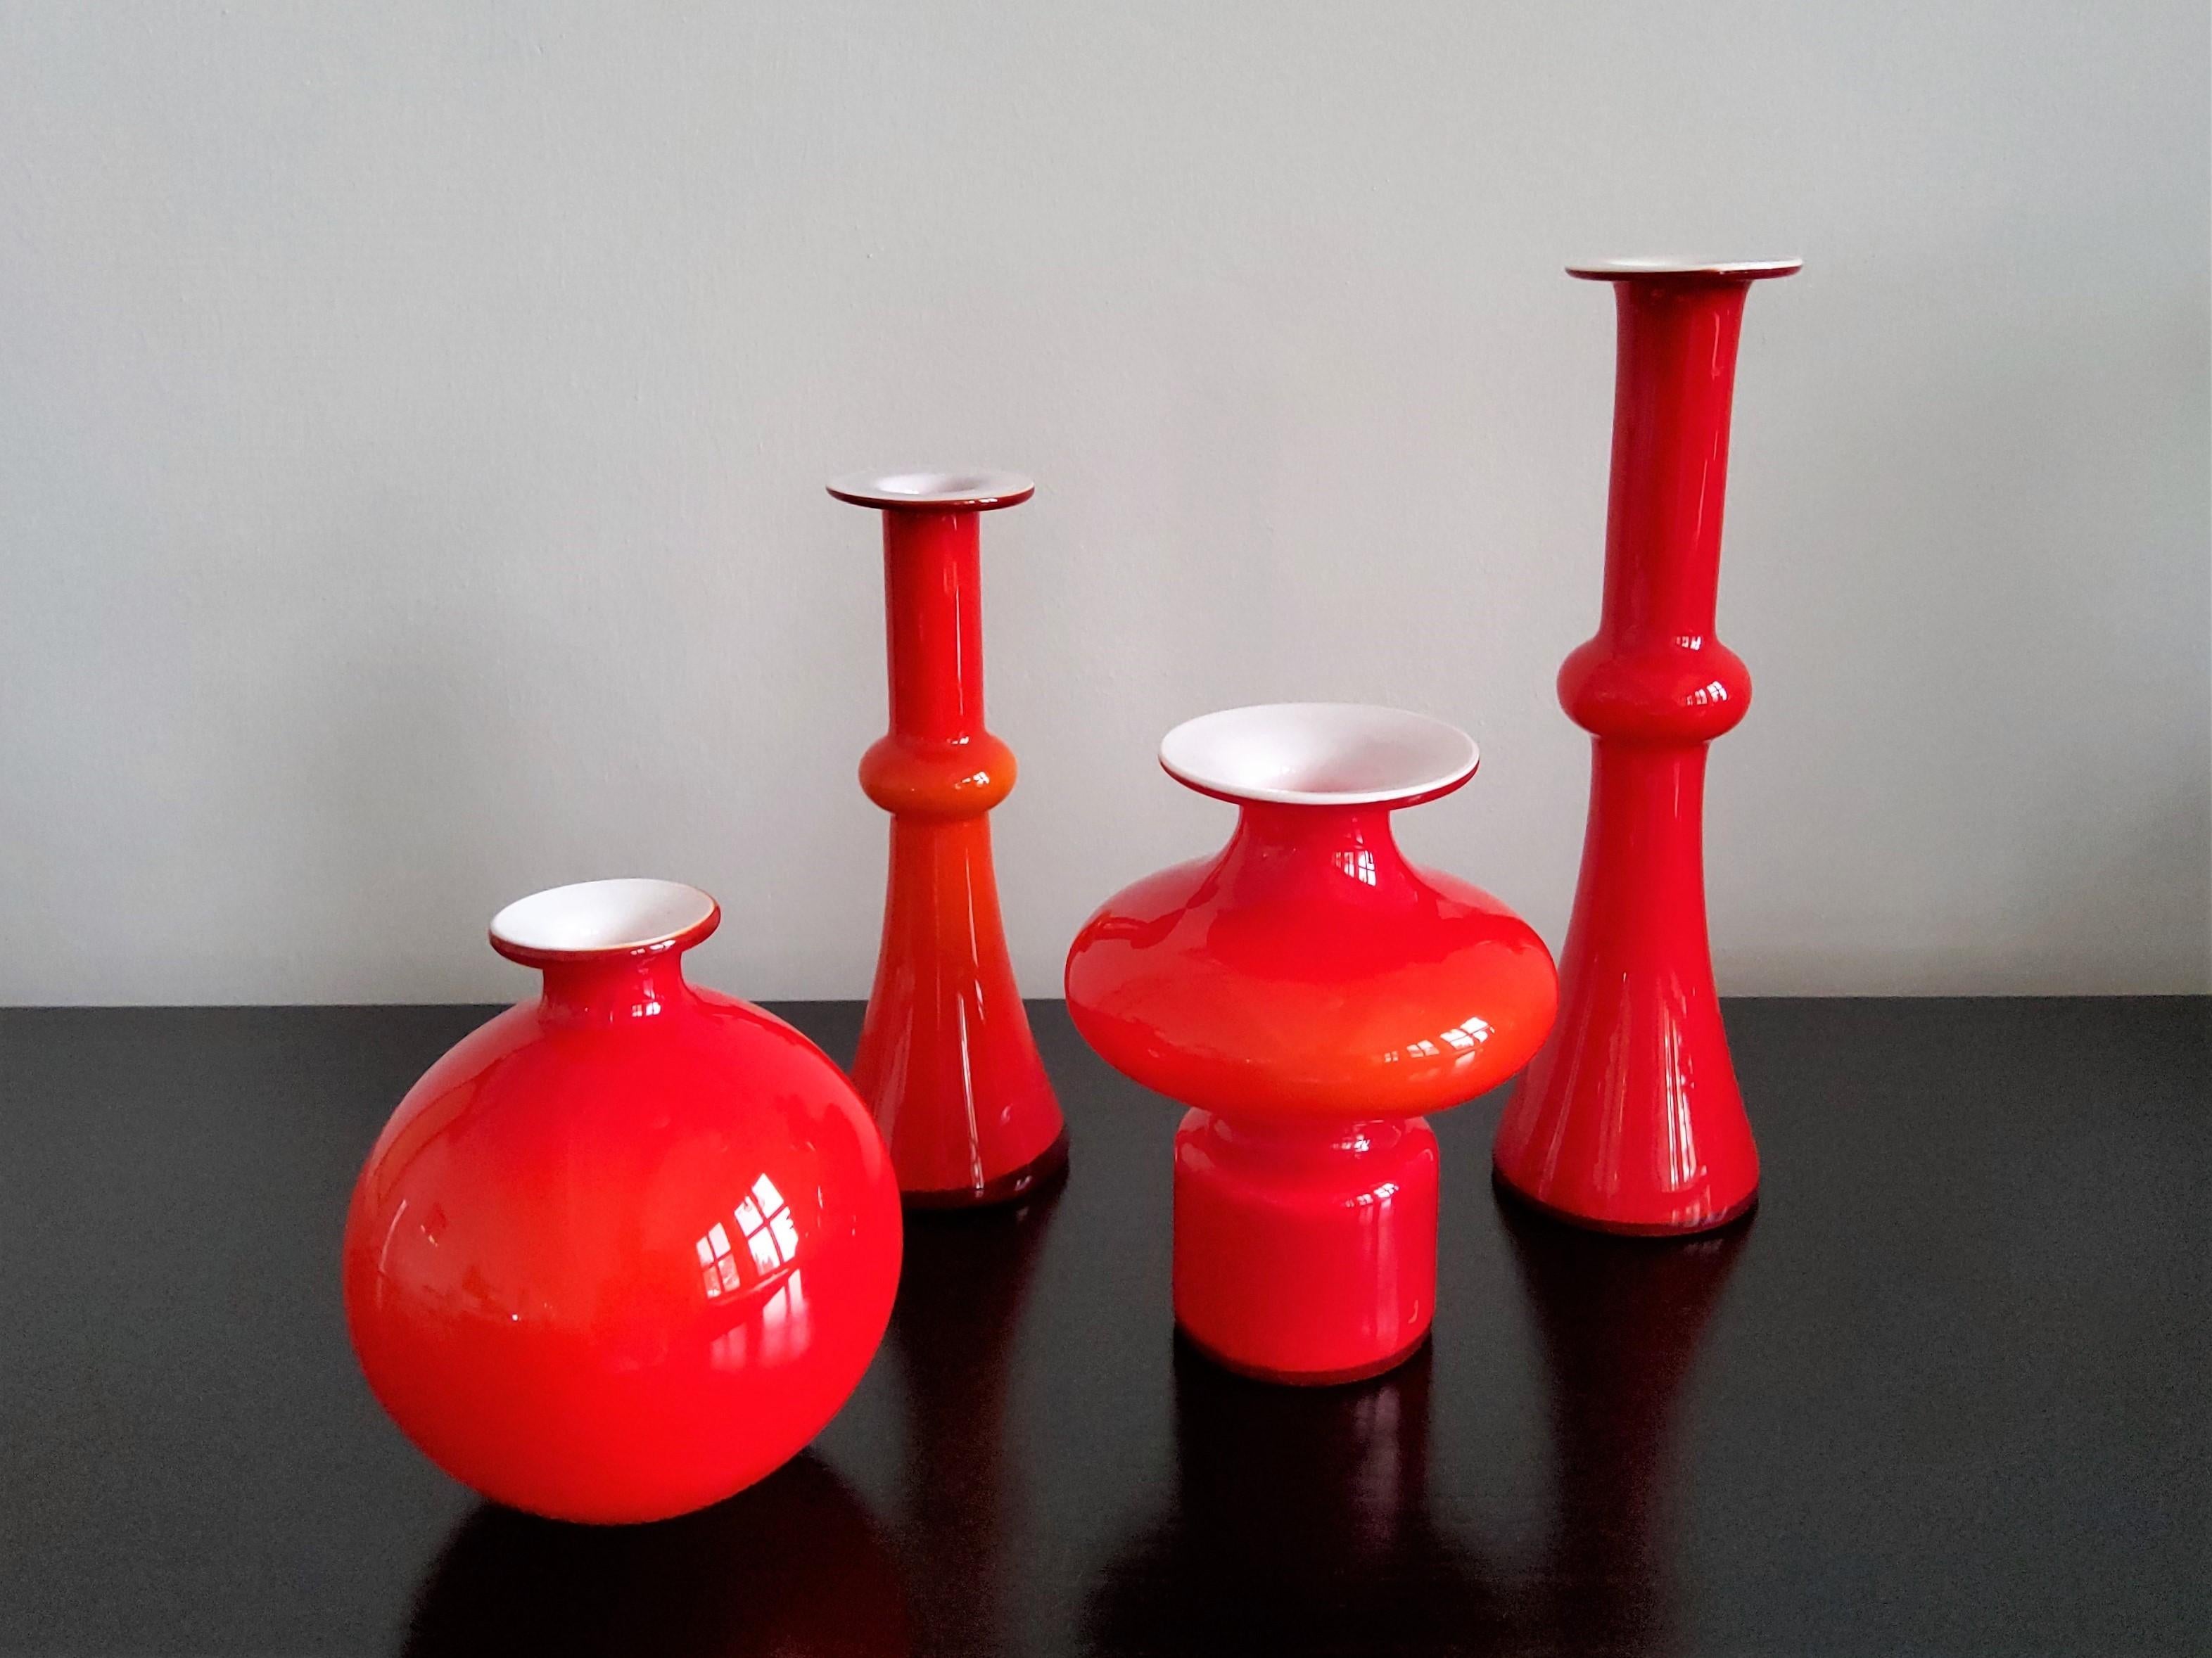 This is a stunning set of 4 red glass Holmegaard vases with white inner casting from the Carnaby range, designed by Per Lütken. All in a very good condition, with minor signs of age and use. Measurements: round, circular vase: H 13,5 cm, ø 12 cm,